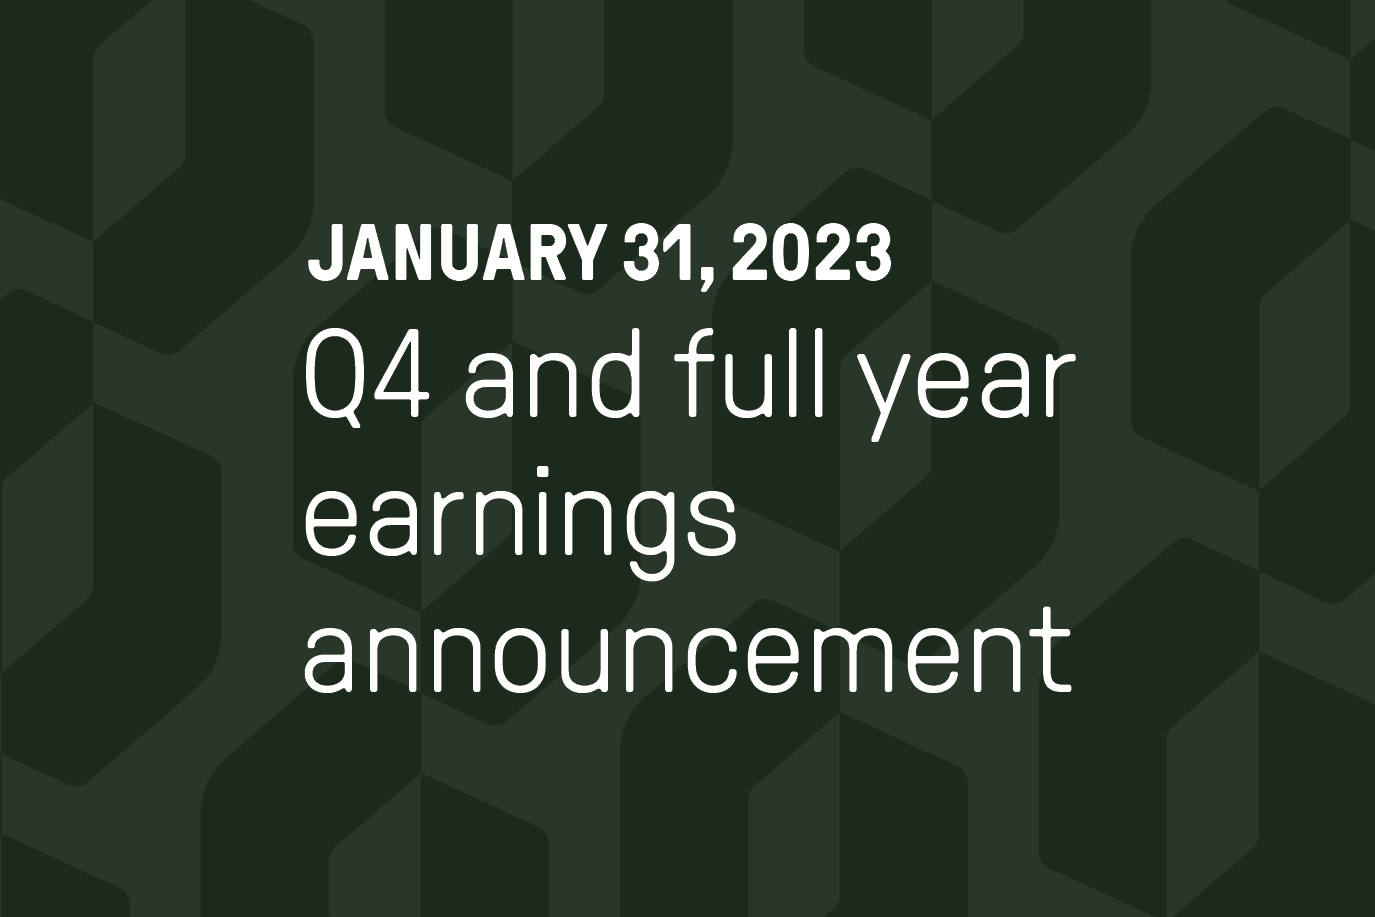 Green Oshkosh logo pattern background with white Oshkosh Corporation logo and white text that reads January 31, 2023 Q4 and full year earnings announcement